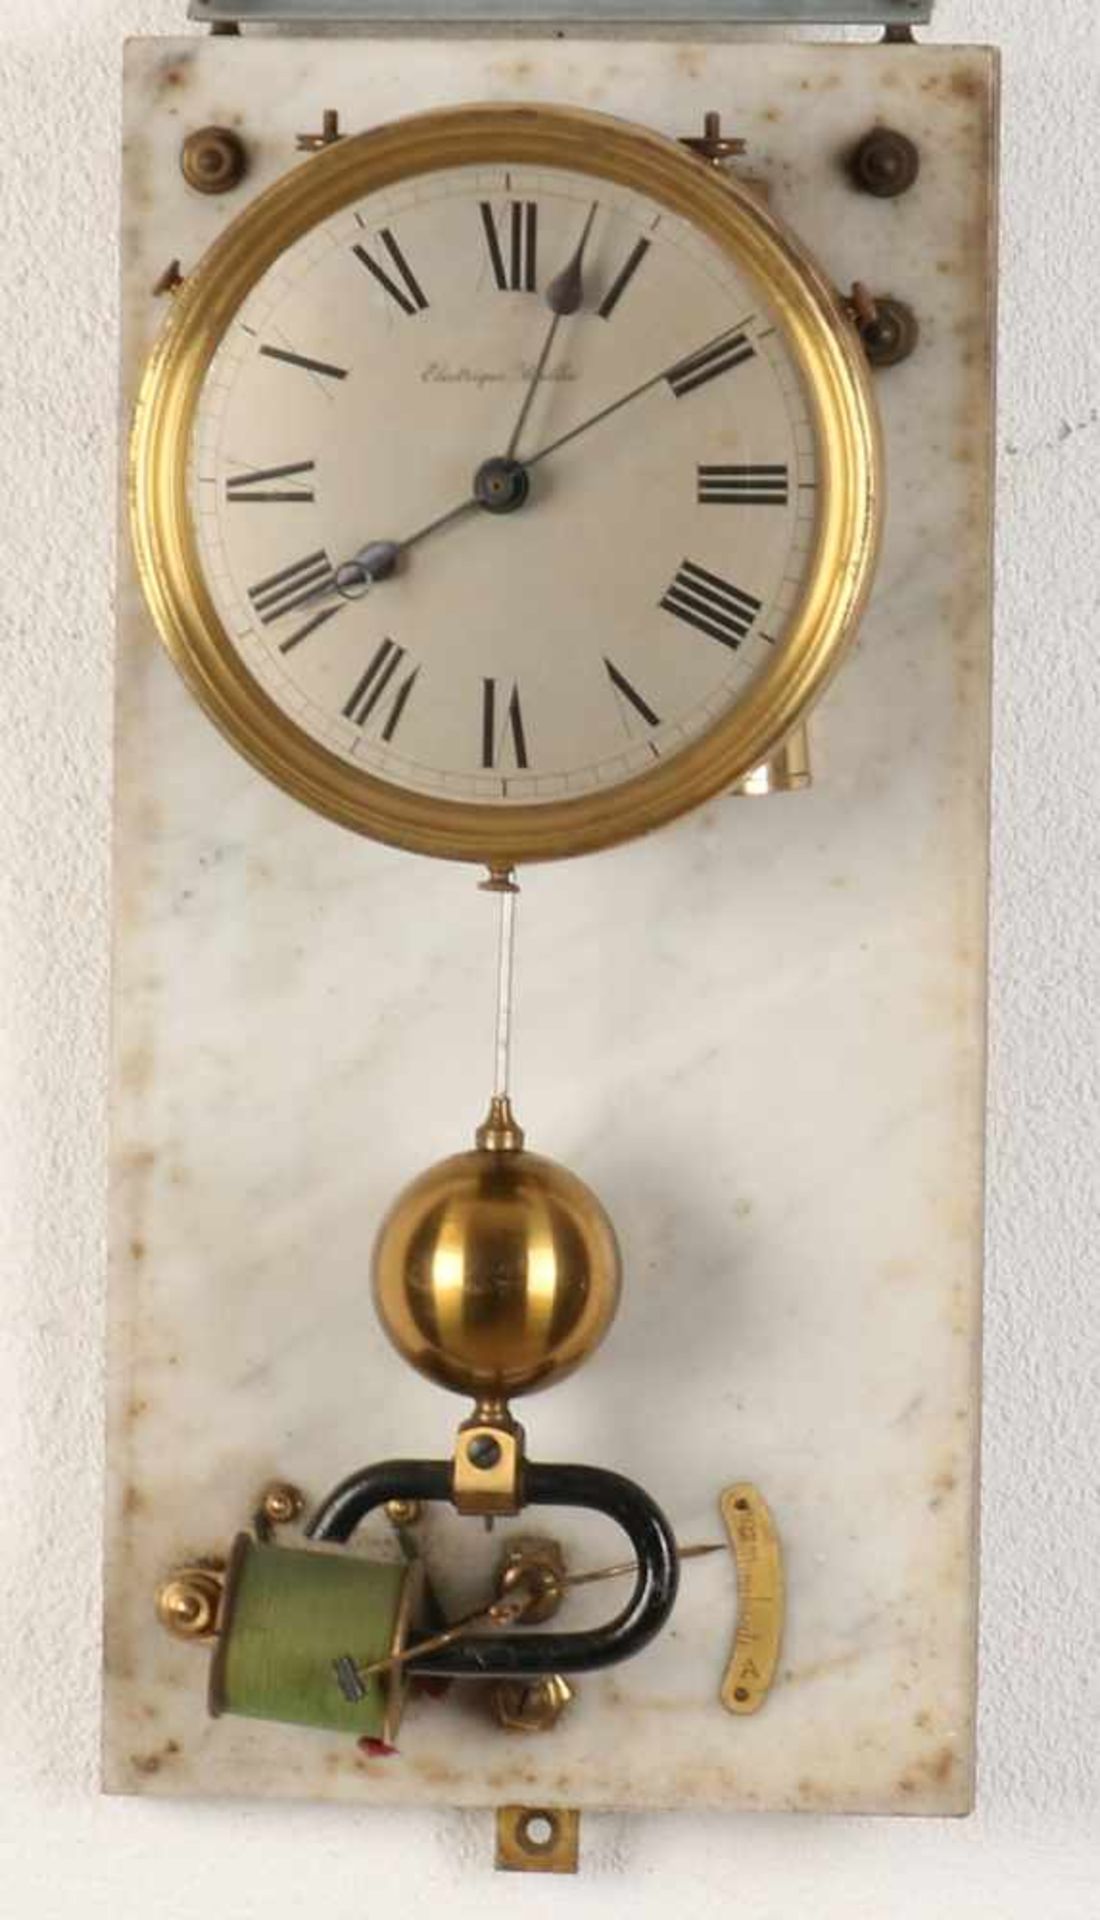 Antique French Electrique Brillie wall clock clock with oak cabinet and central seconds hand. - Bild 2 aus 2